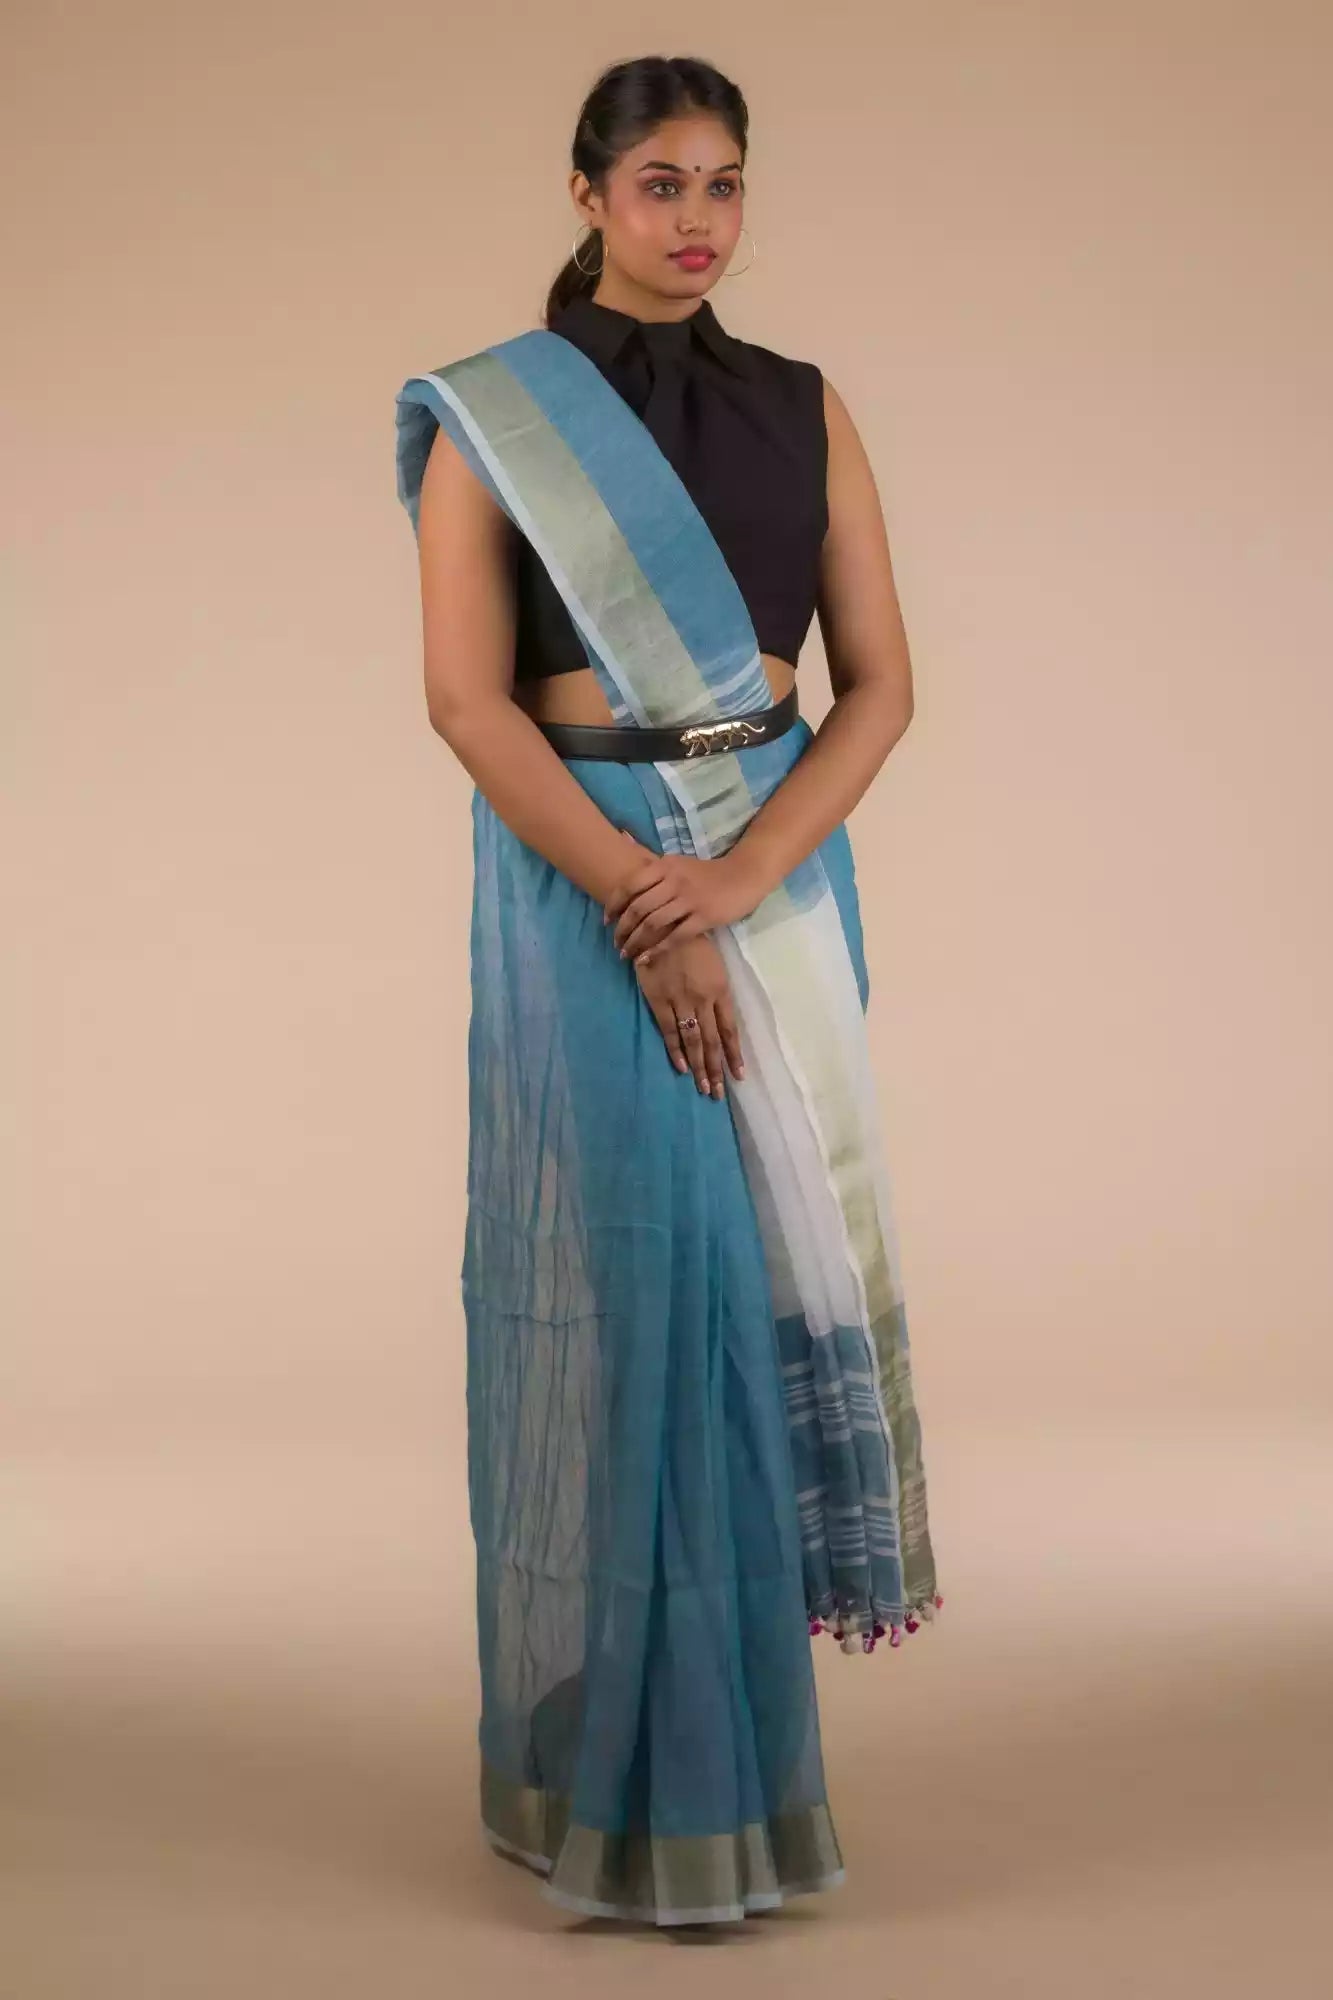 woman wearing a blue saree and a black blouse with stripes at the border and a belt